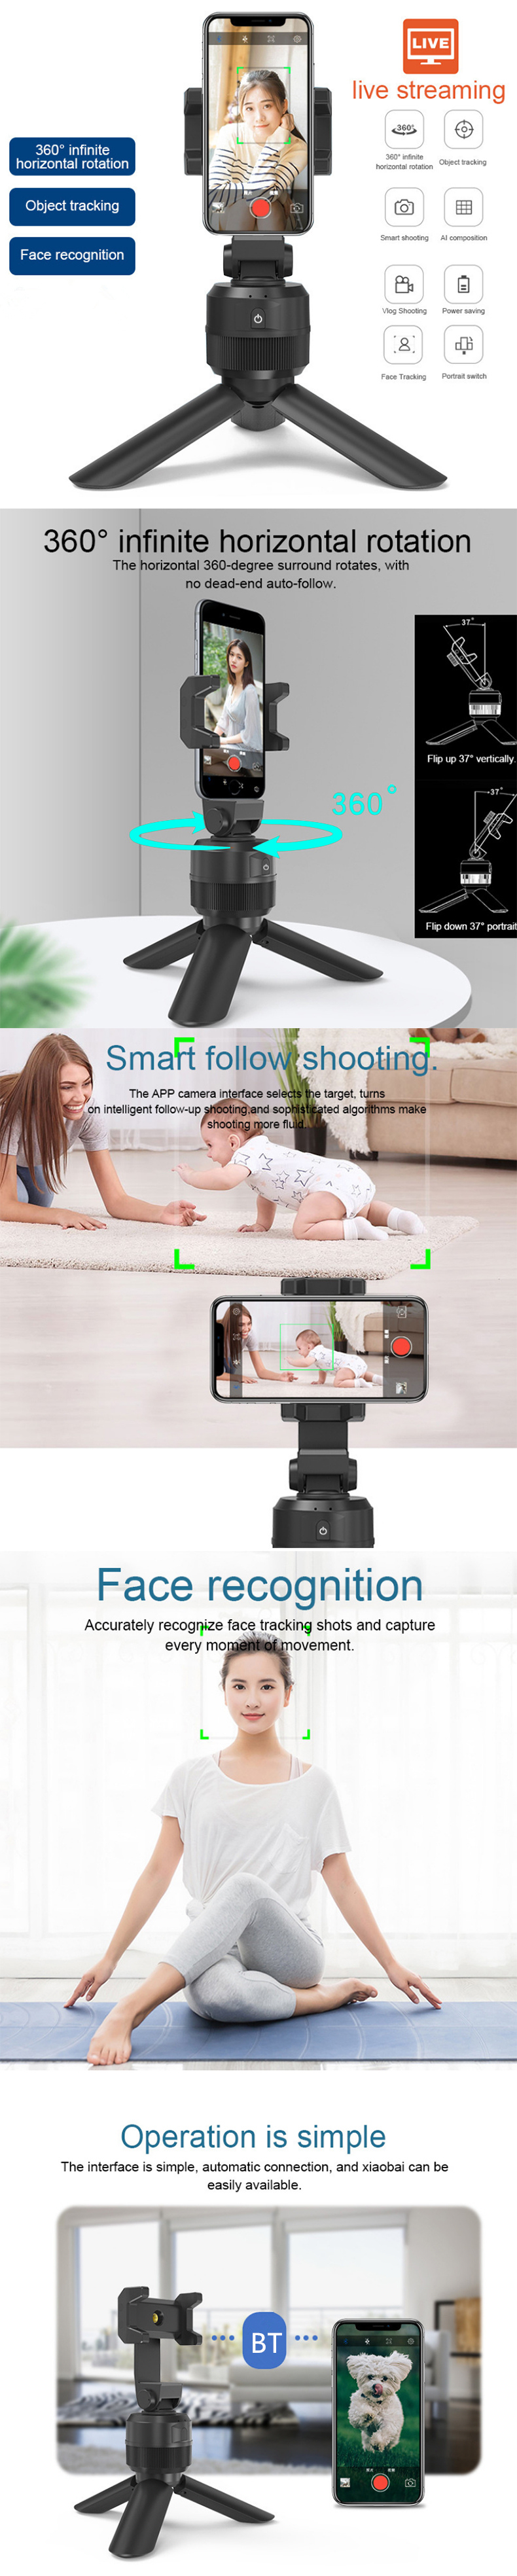 Bakeey 360° Intelligent Auto Face Tracking Mobile Phone Stand Gimbal Stabilizer Tripod for Selfie Vlogging Streaming